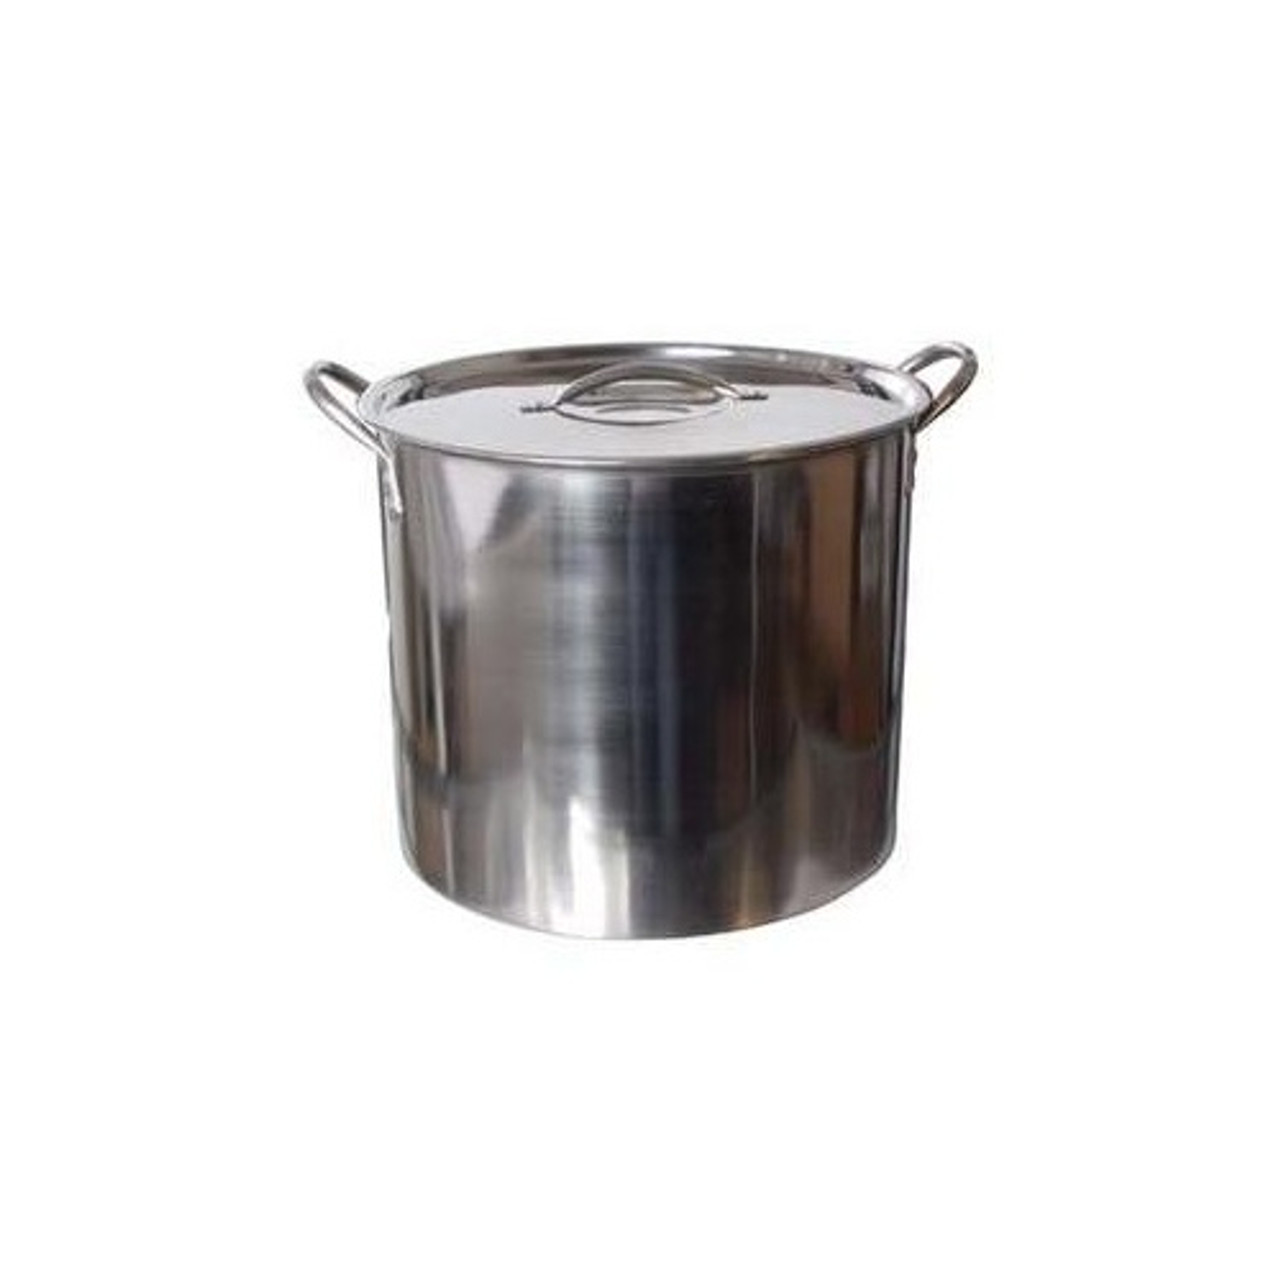 5 Gallon Brew Kettle in Stainless Steel